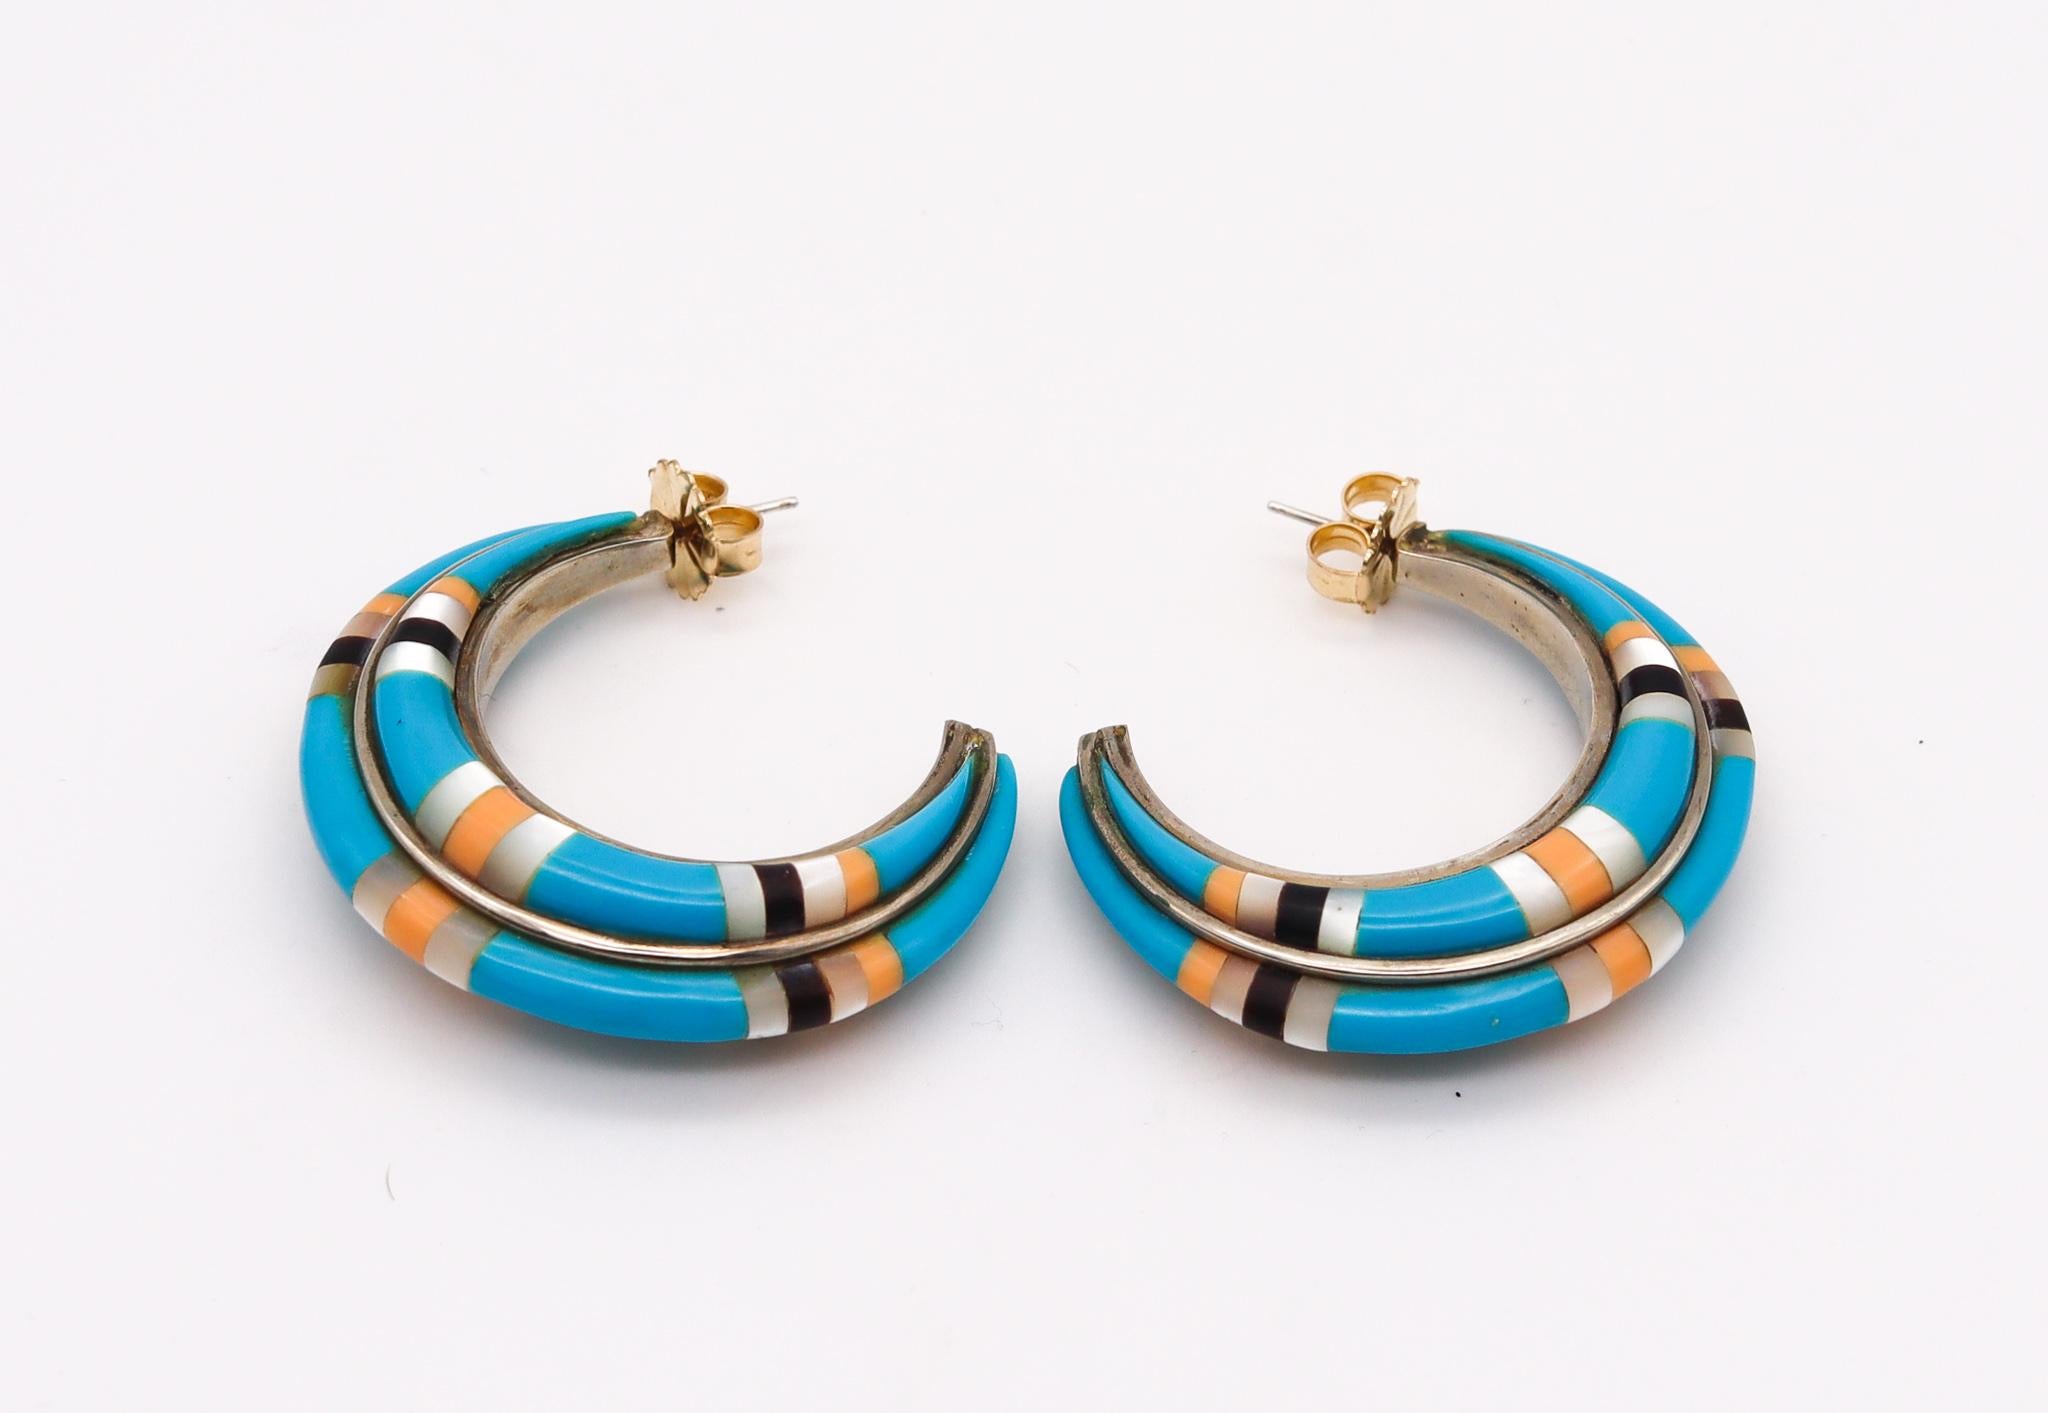 A Native American Navajo hoops earrings

An exceptional tribal piece with gorgeous eye appeal, created in Arizona by the Navajo native Americans back in the 1970's. This unusual colorful pair of hoops earrings was completely crafted in solid